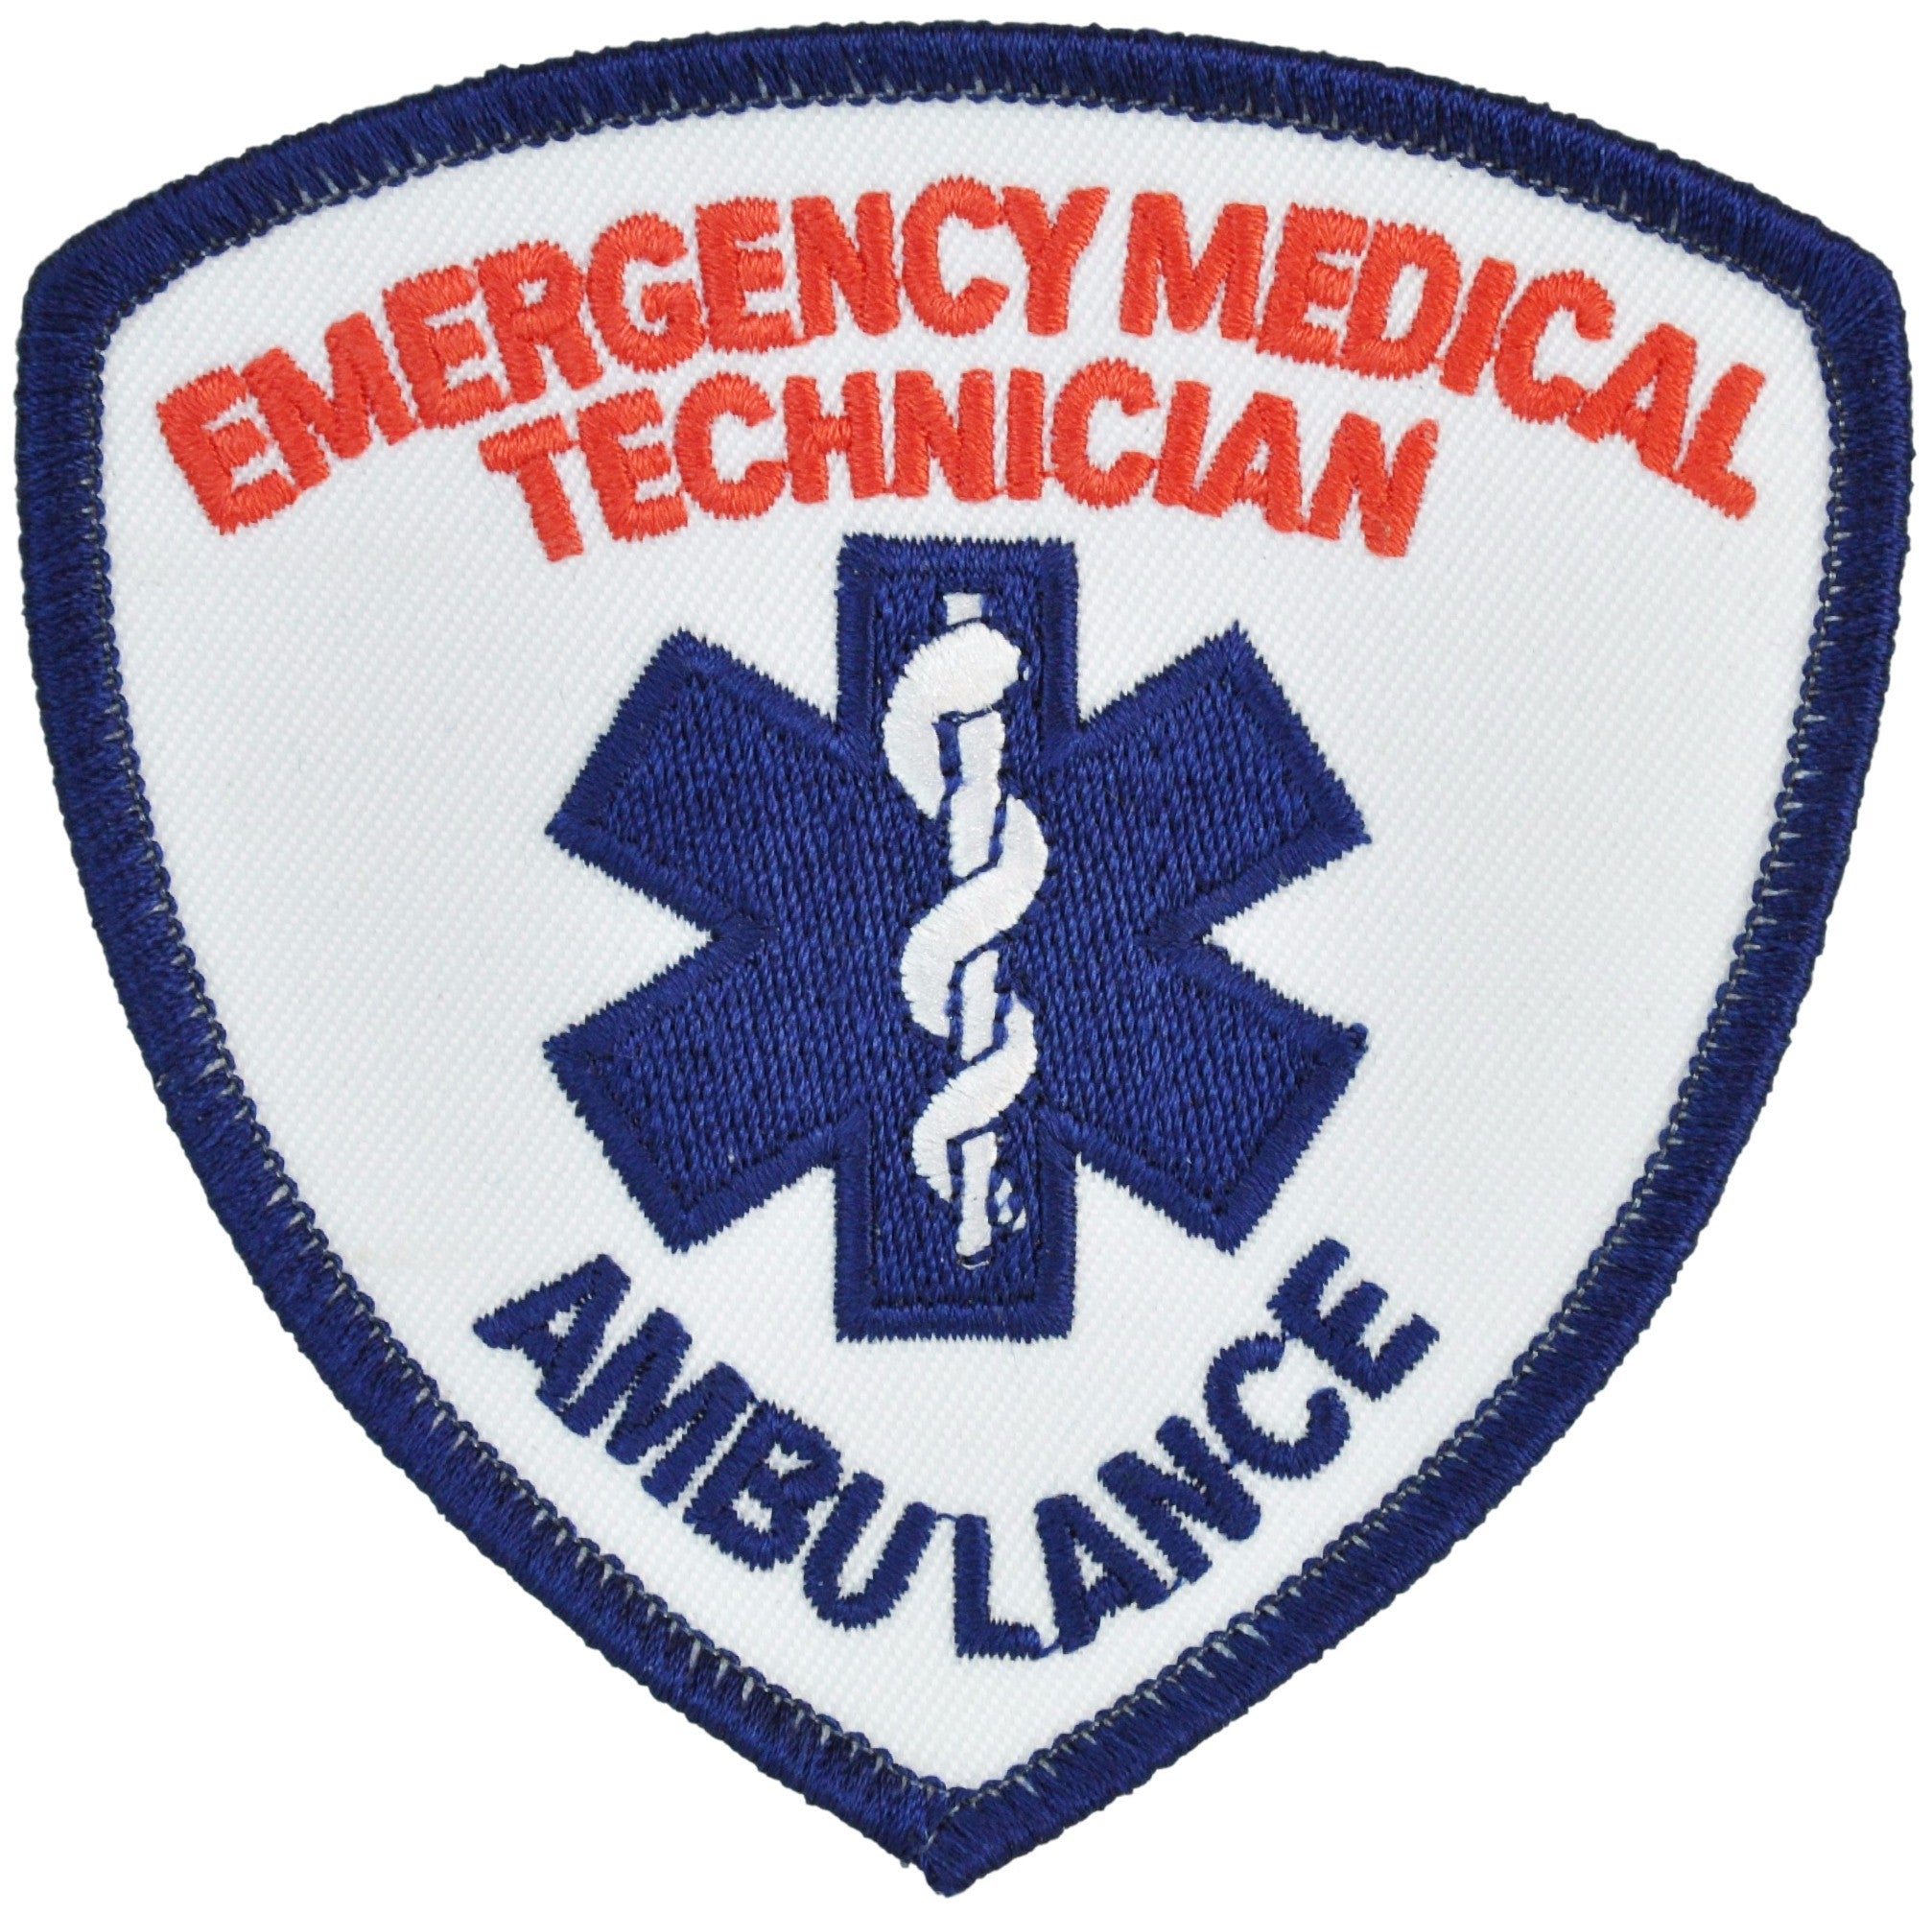 Emergency Medical Technician (EMT) with Ambulance Patch (Red & Blue)